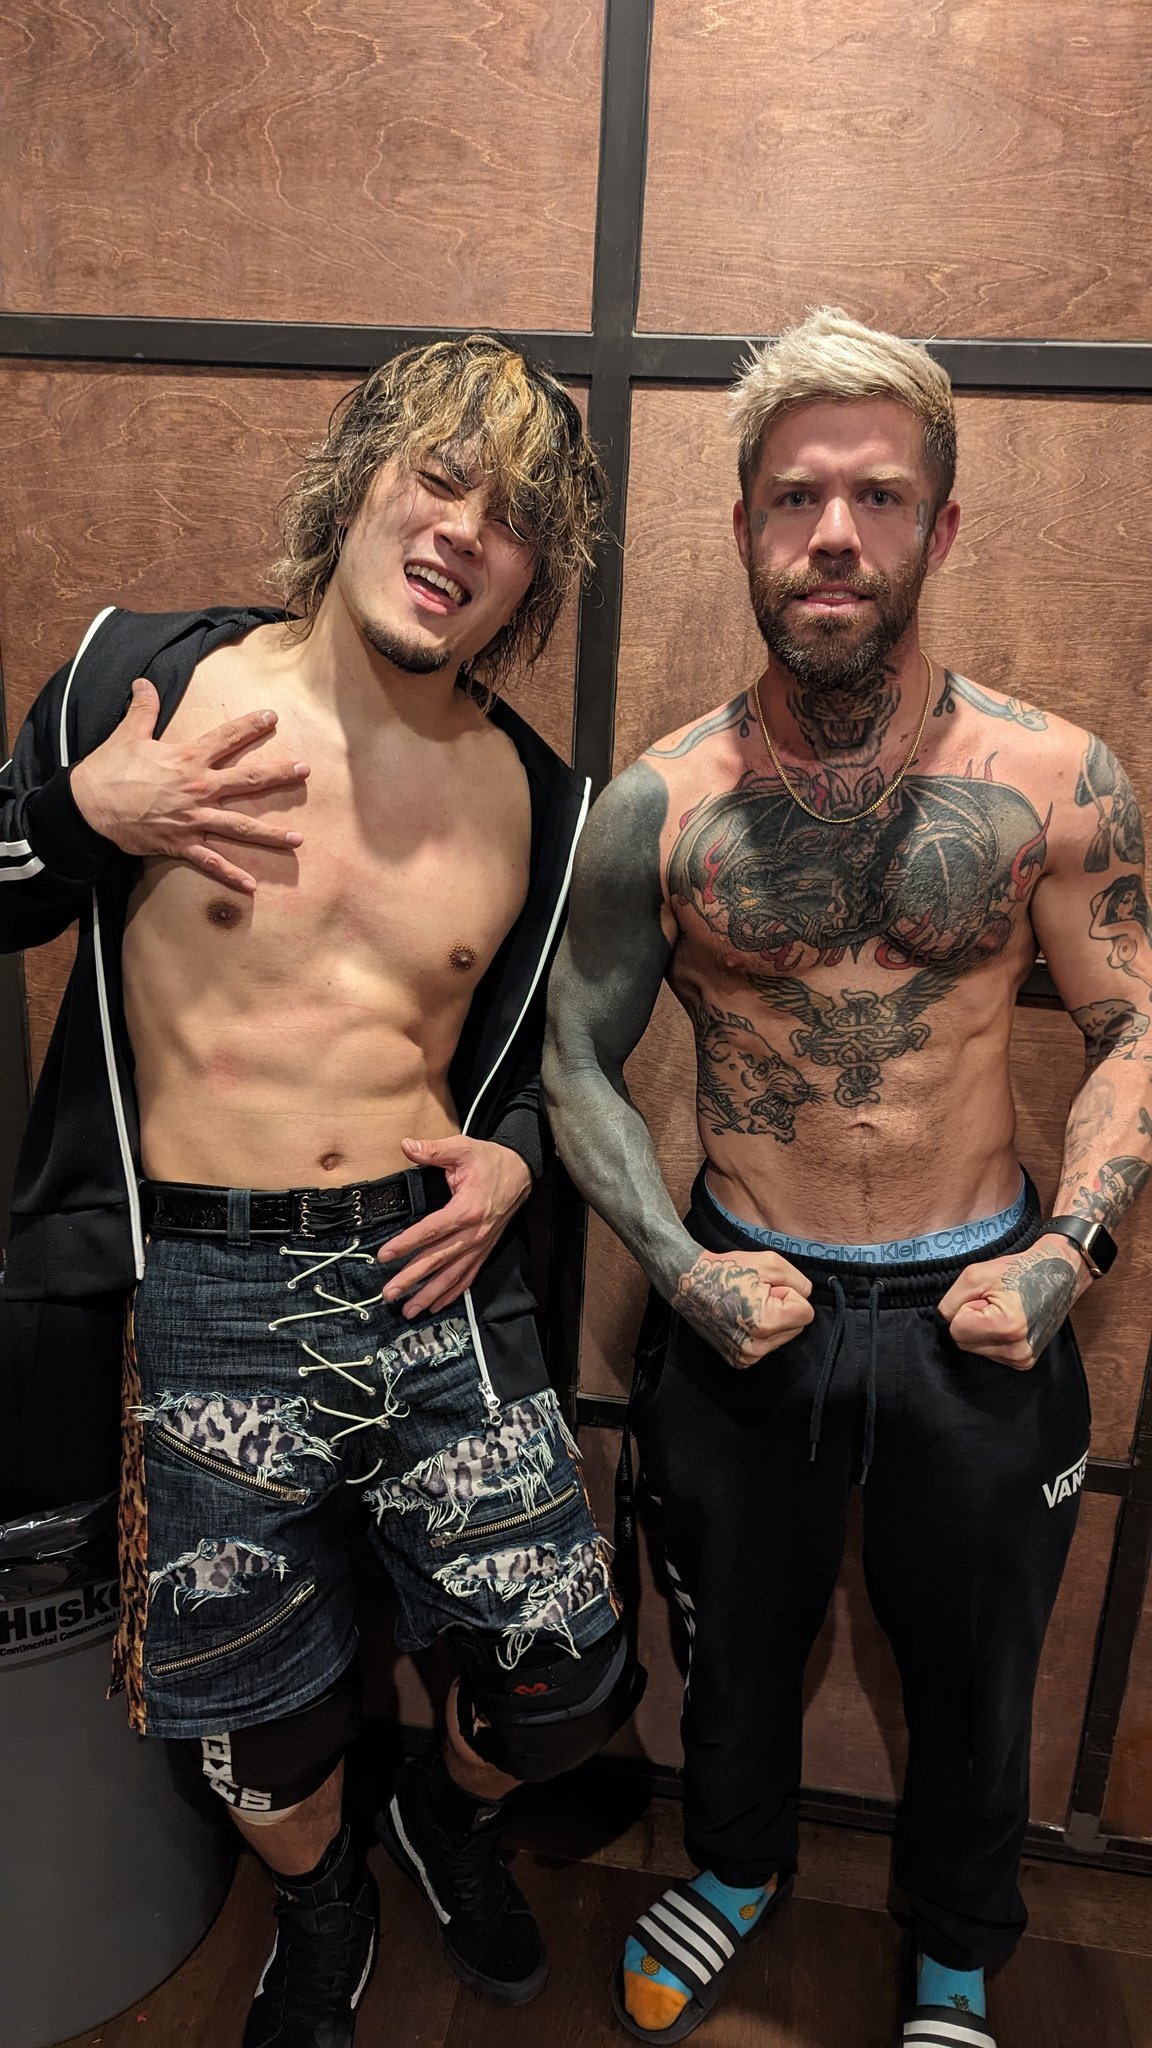 Pro Wrestlers MAO and Kevin Blackwood posing next to eachother.